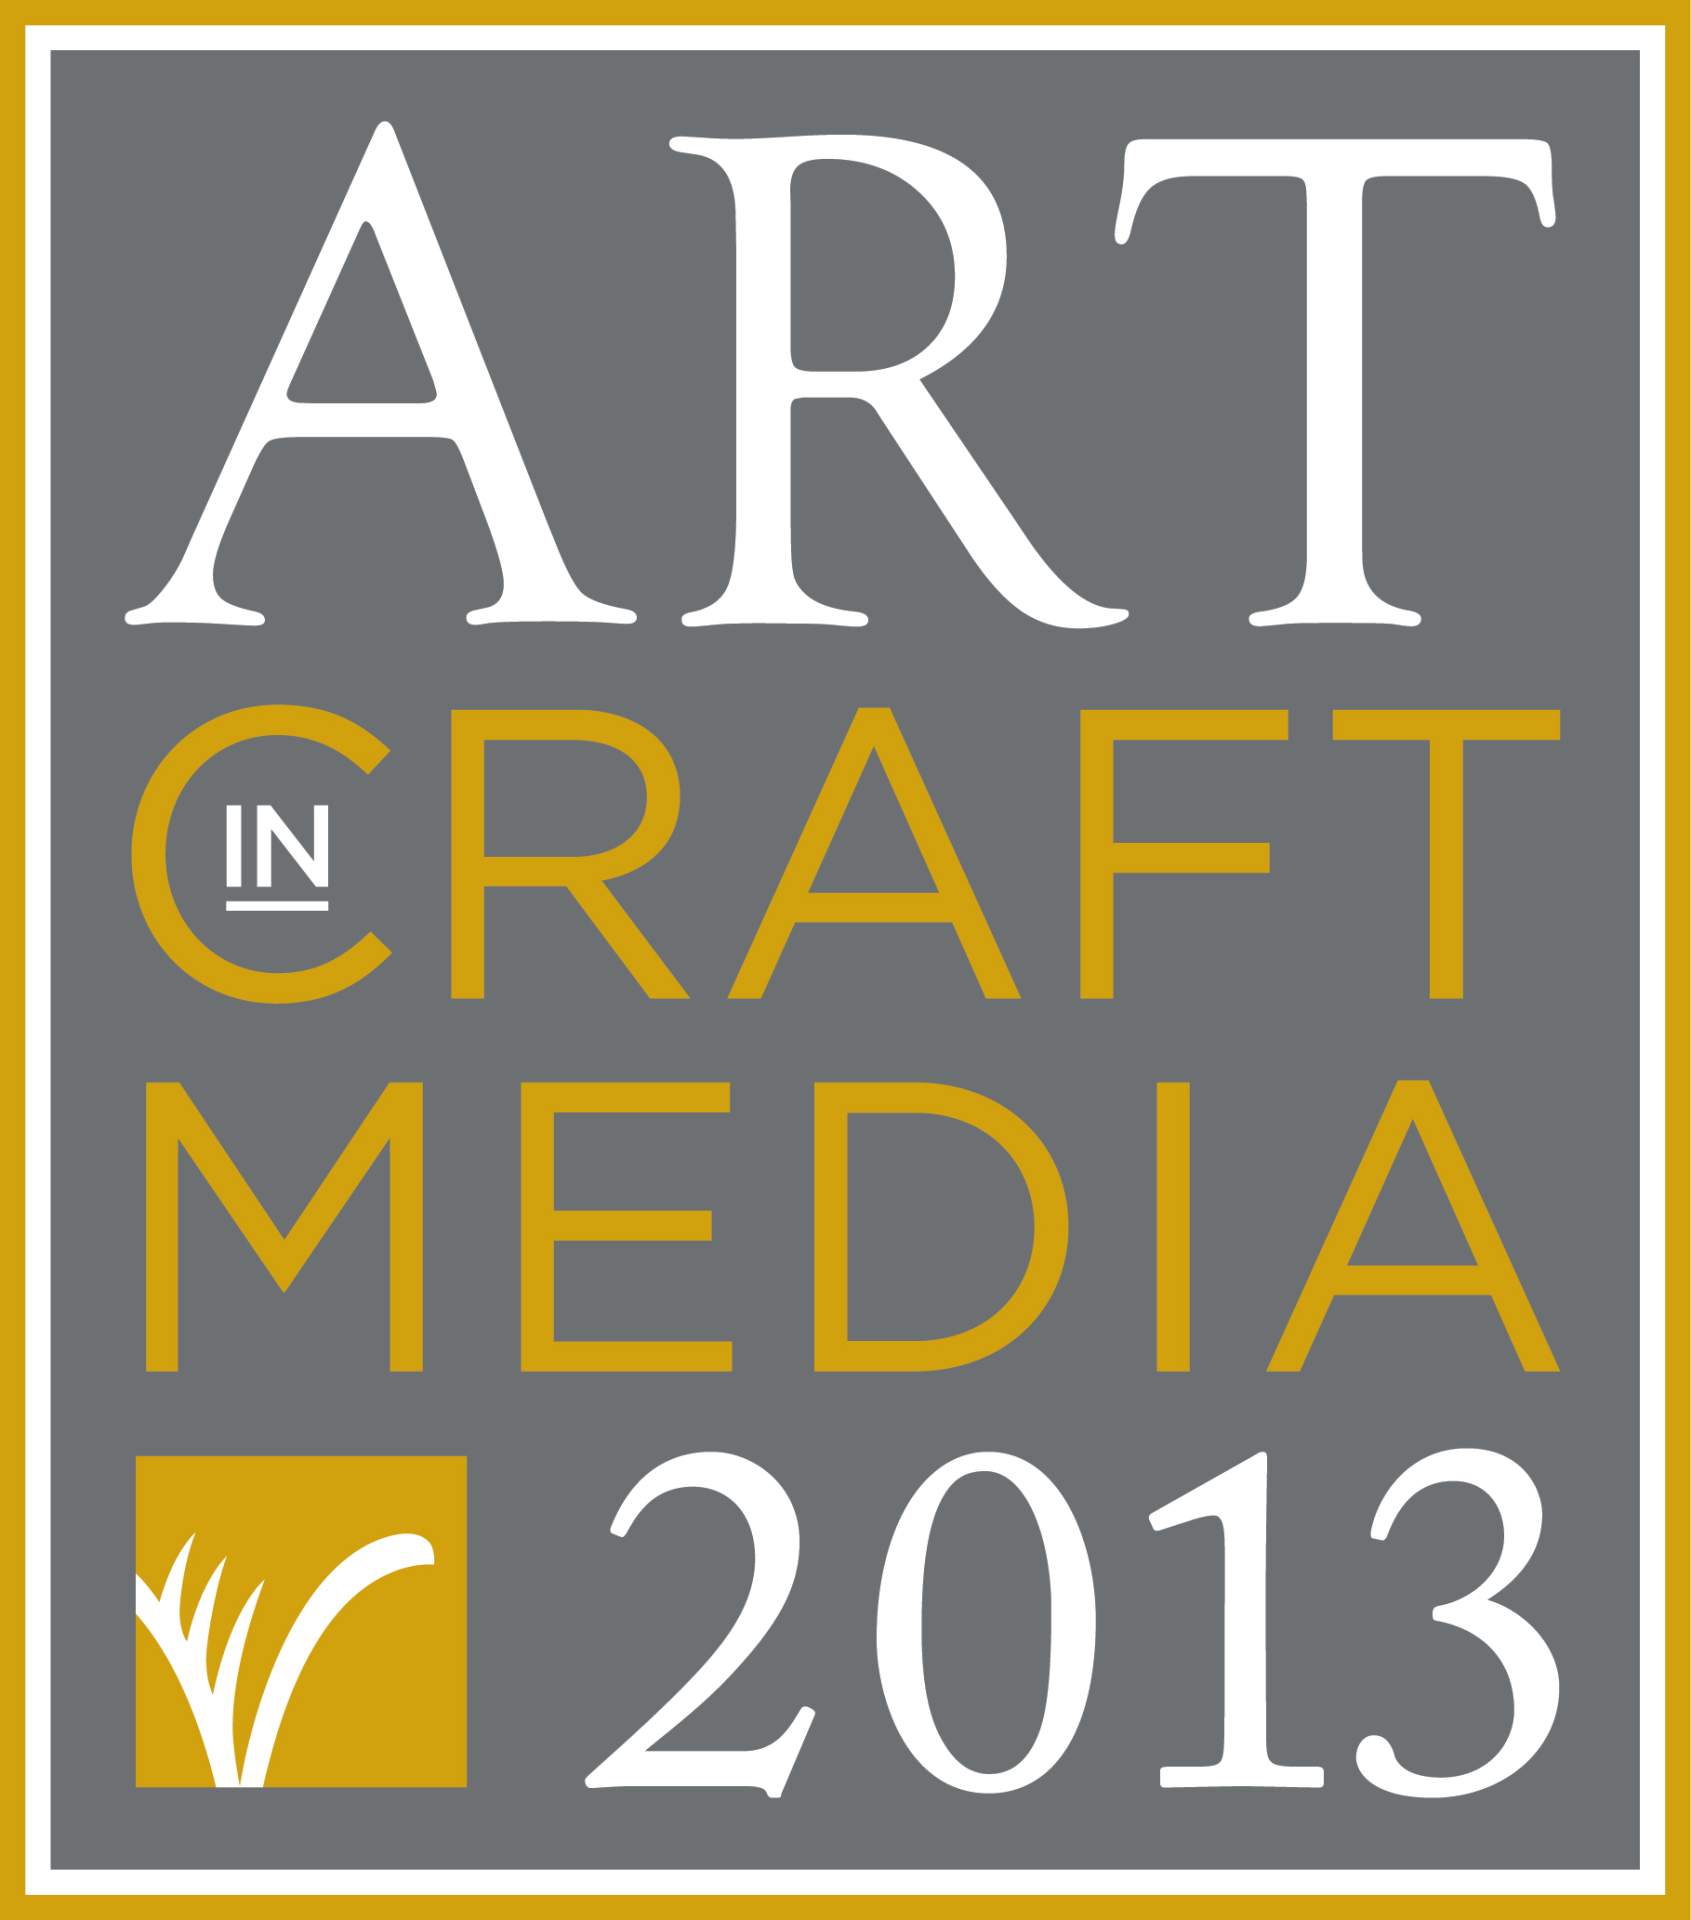 Call for Works for Art in Craft Media 2013